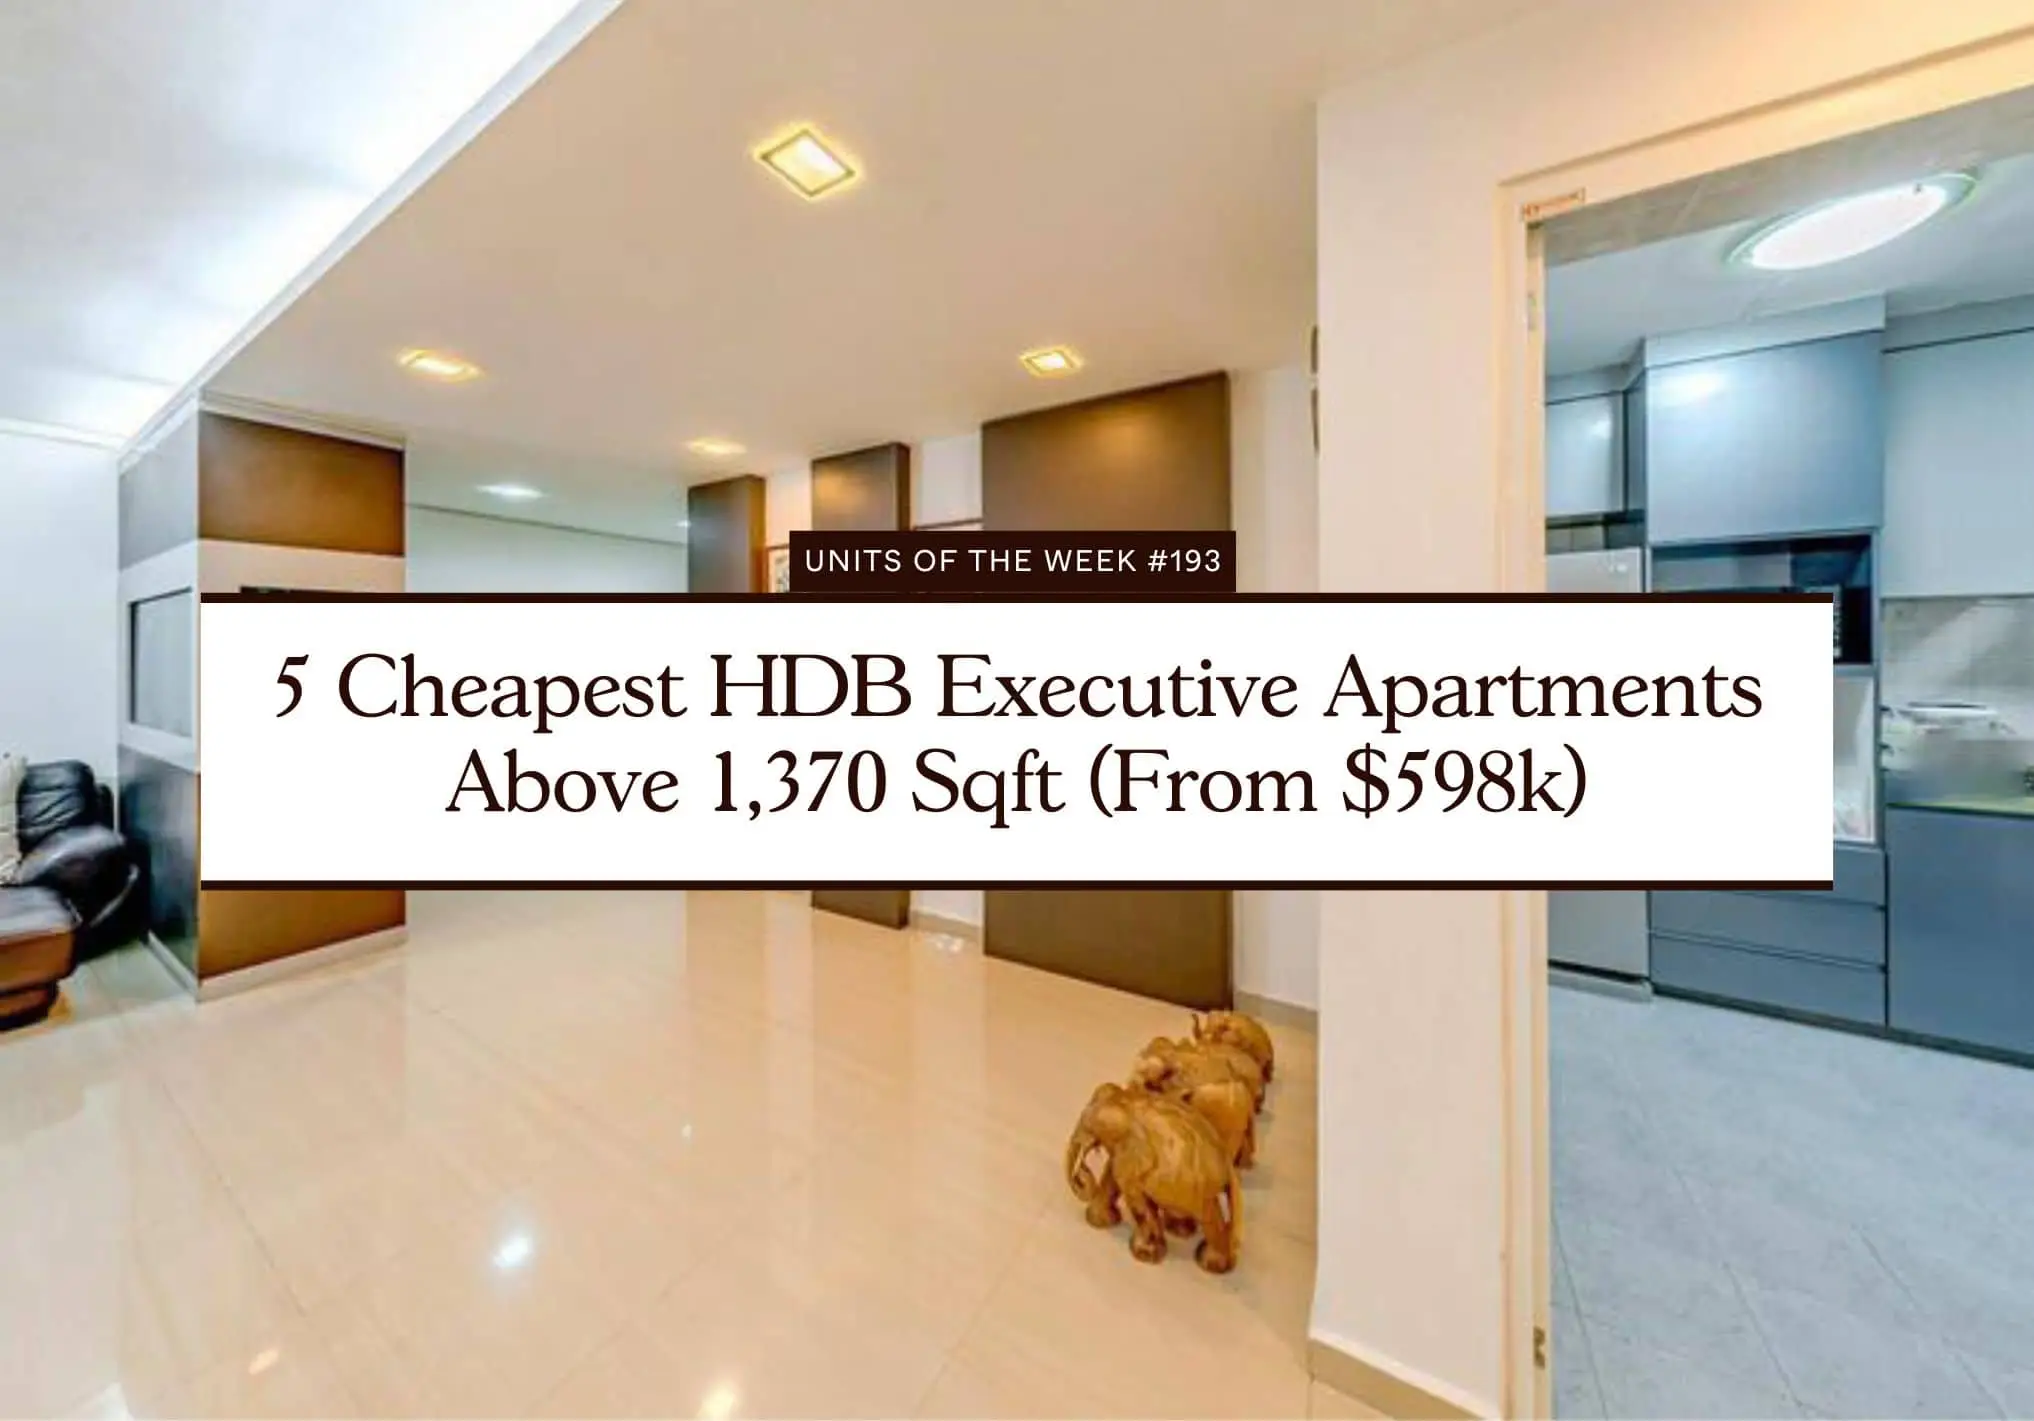 5 Cheapest HDB Executive Apartments Above 1,370 Sqft (From $598k)